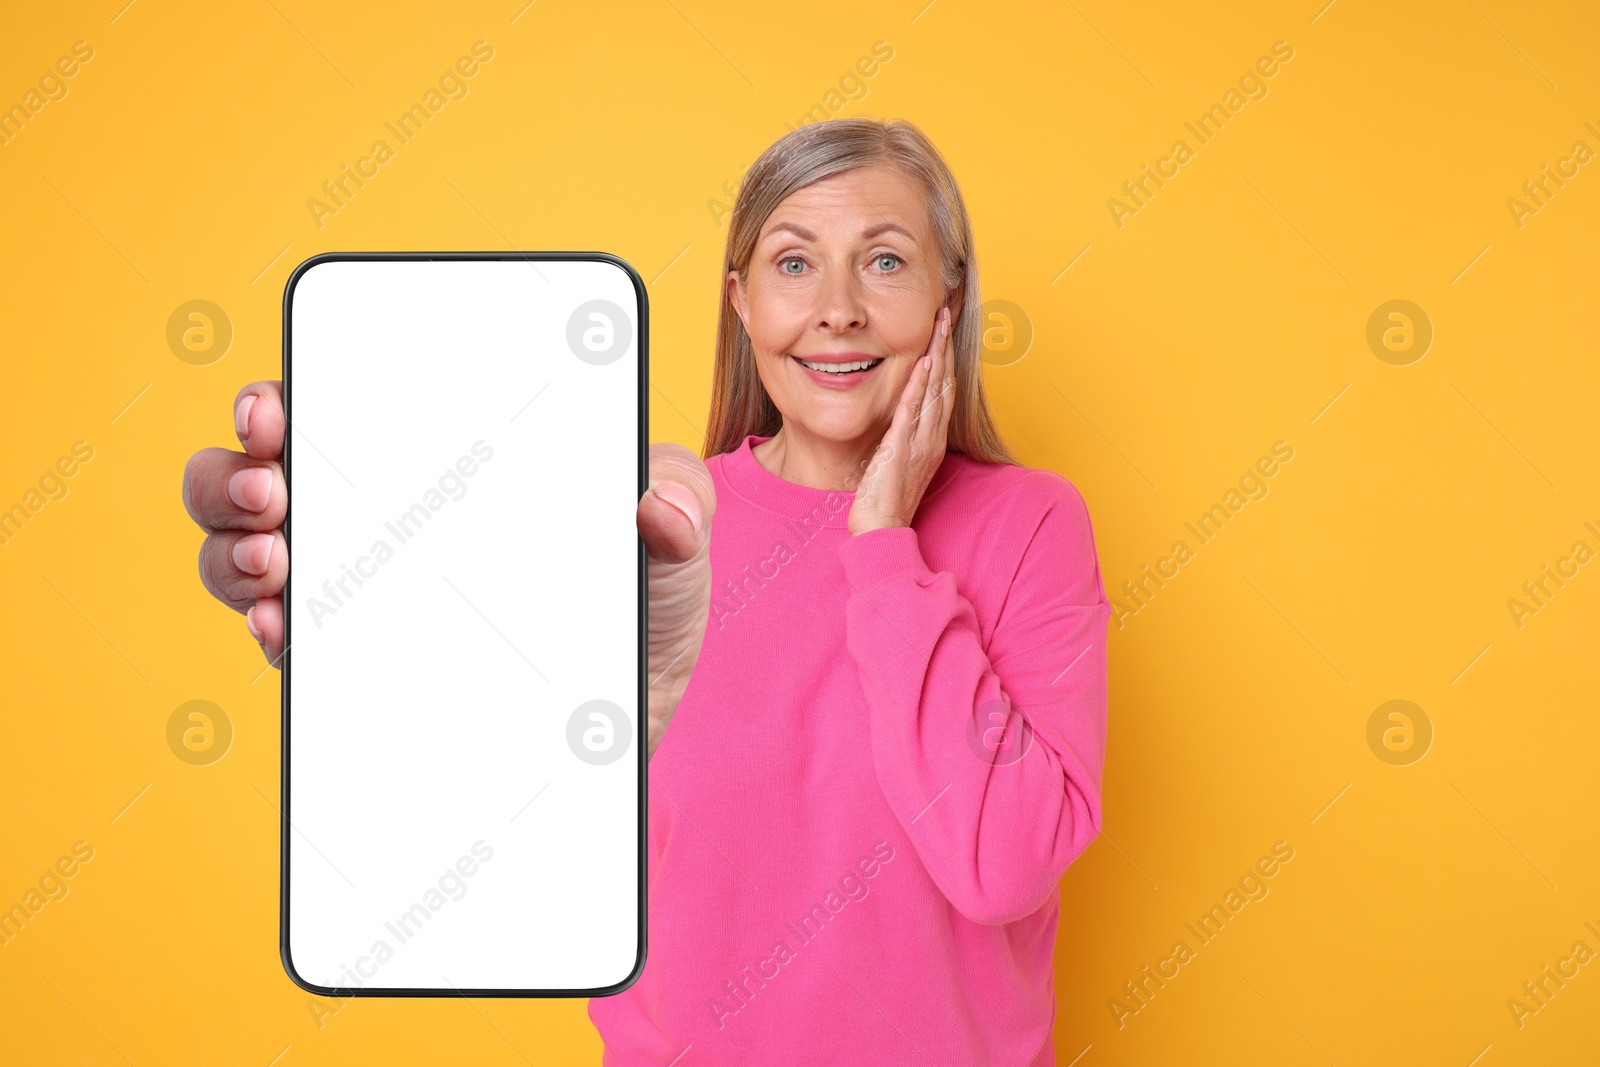 Image of Happy mature woman showing mobile phone with blank screen on golden background. Mockup for design